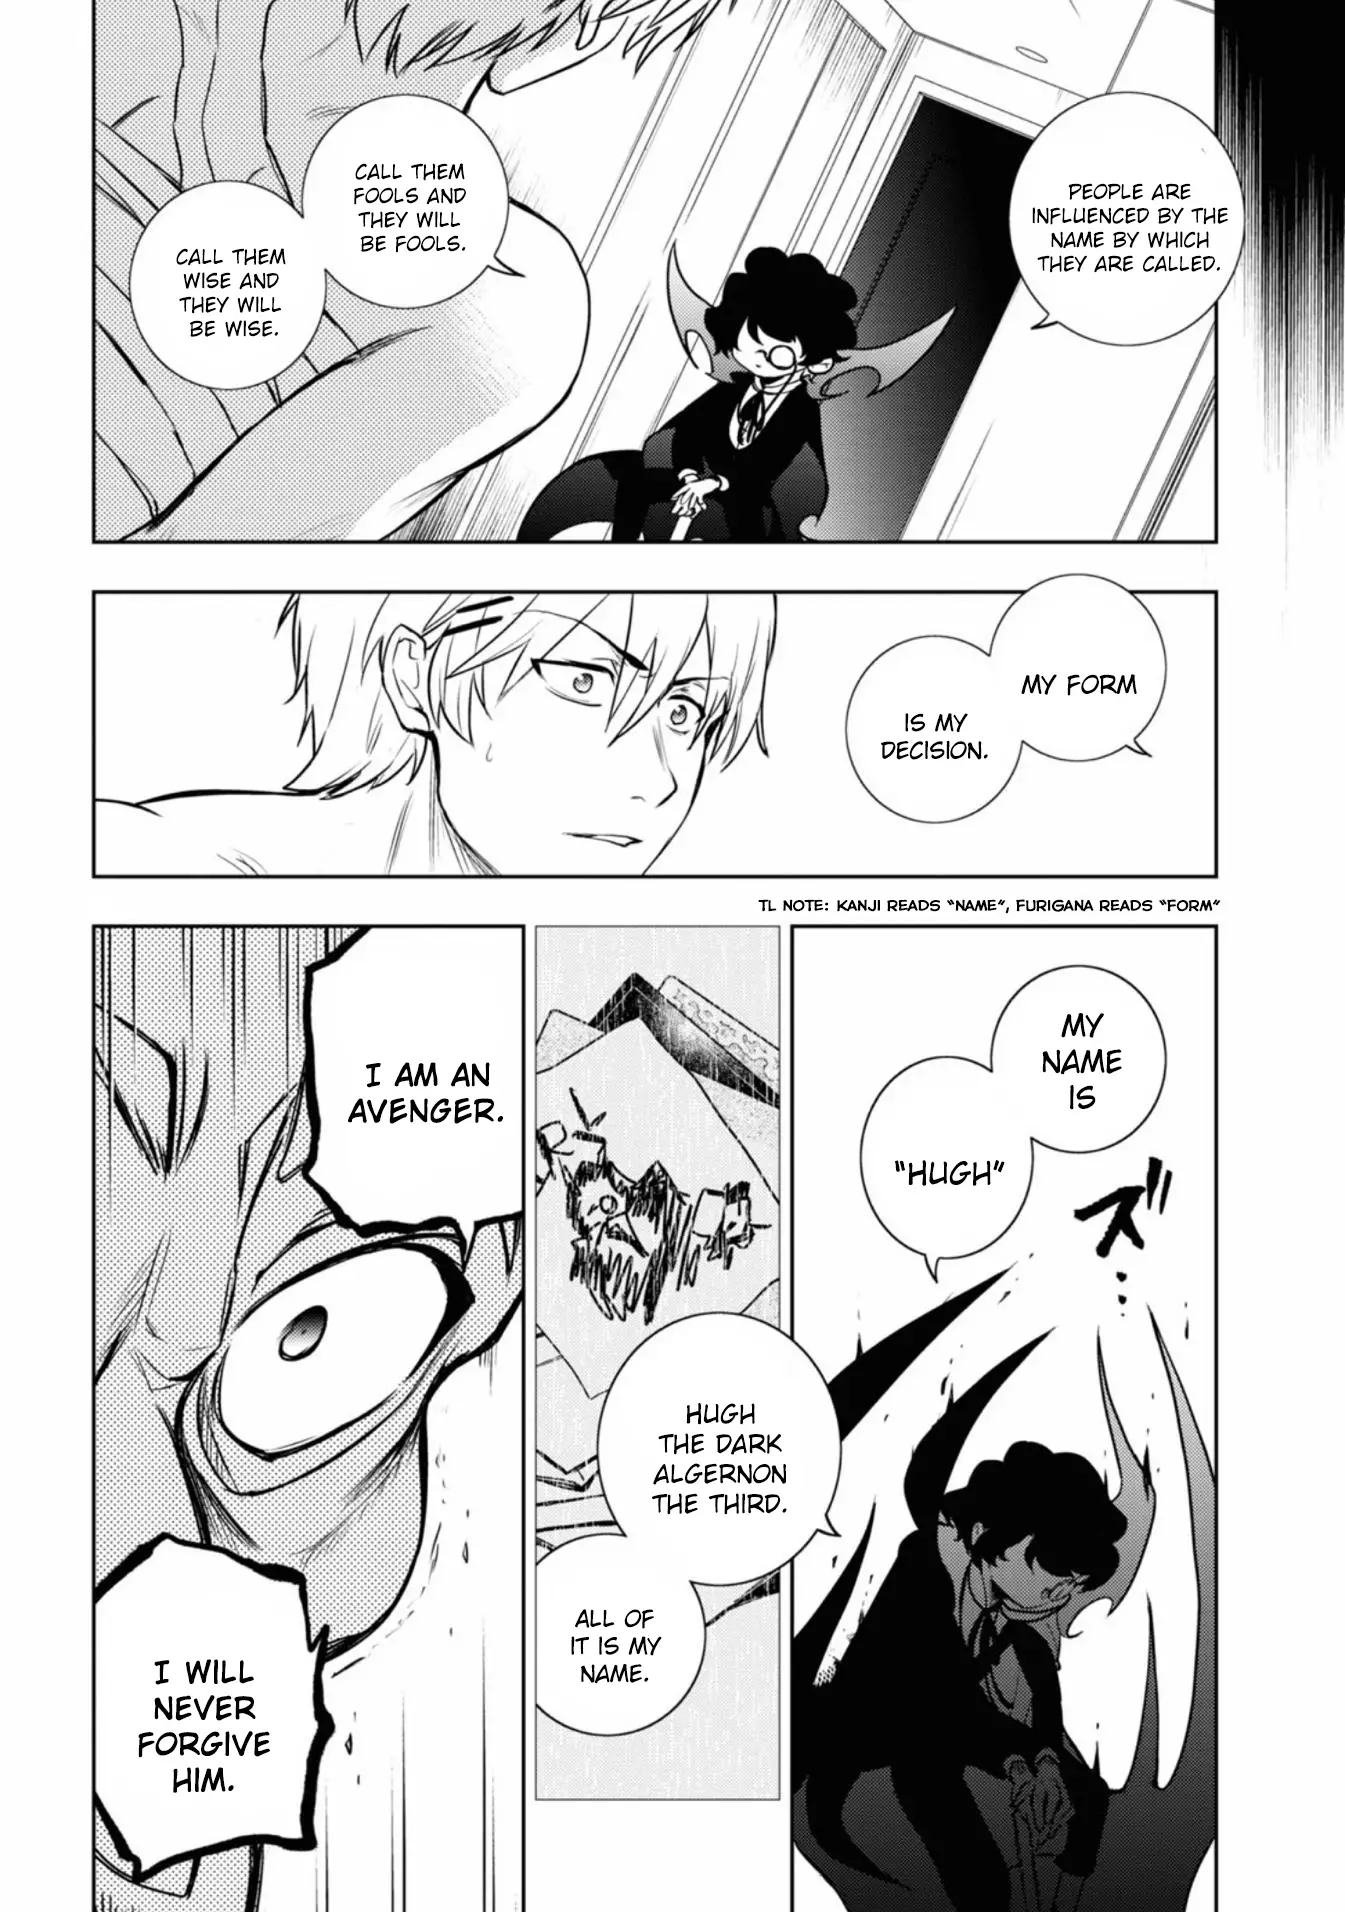 Servamp - 126 page 18-60c76eed